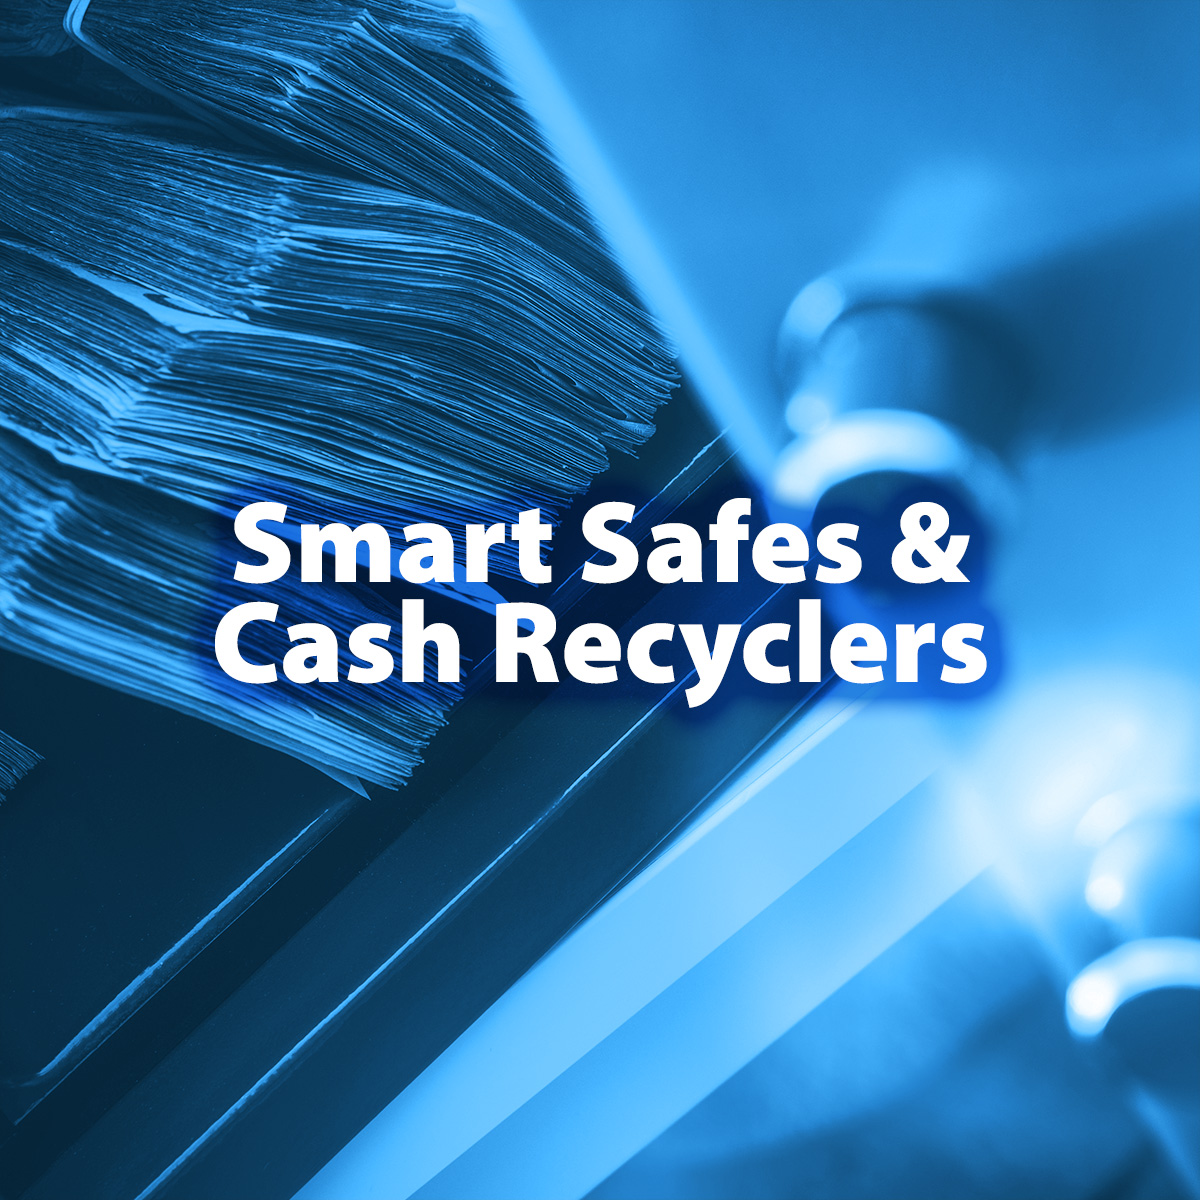 Smart Safes and Cash Recyclers